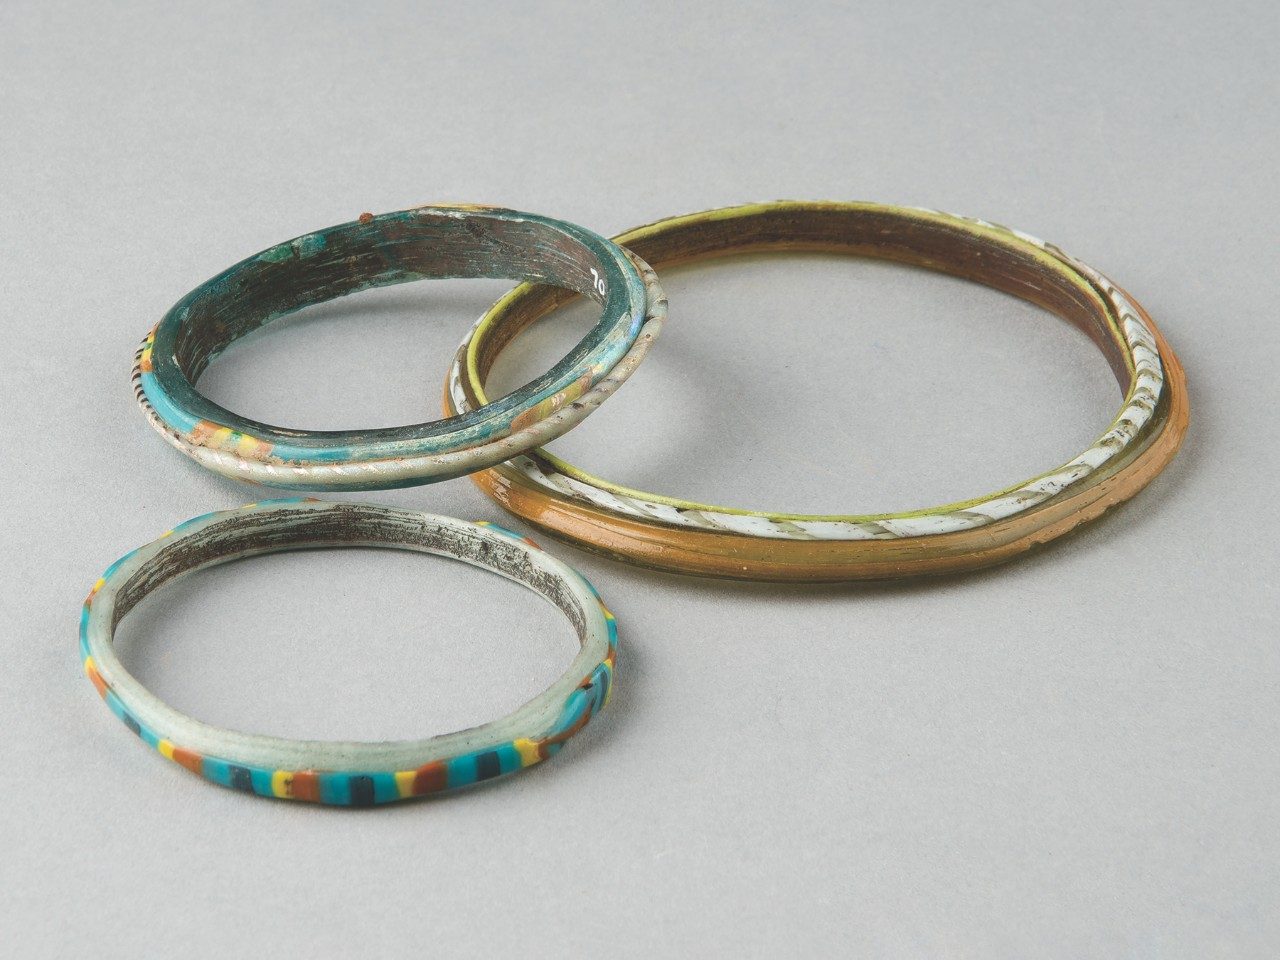 Three glass bangles with colorful geometric patterns.